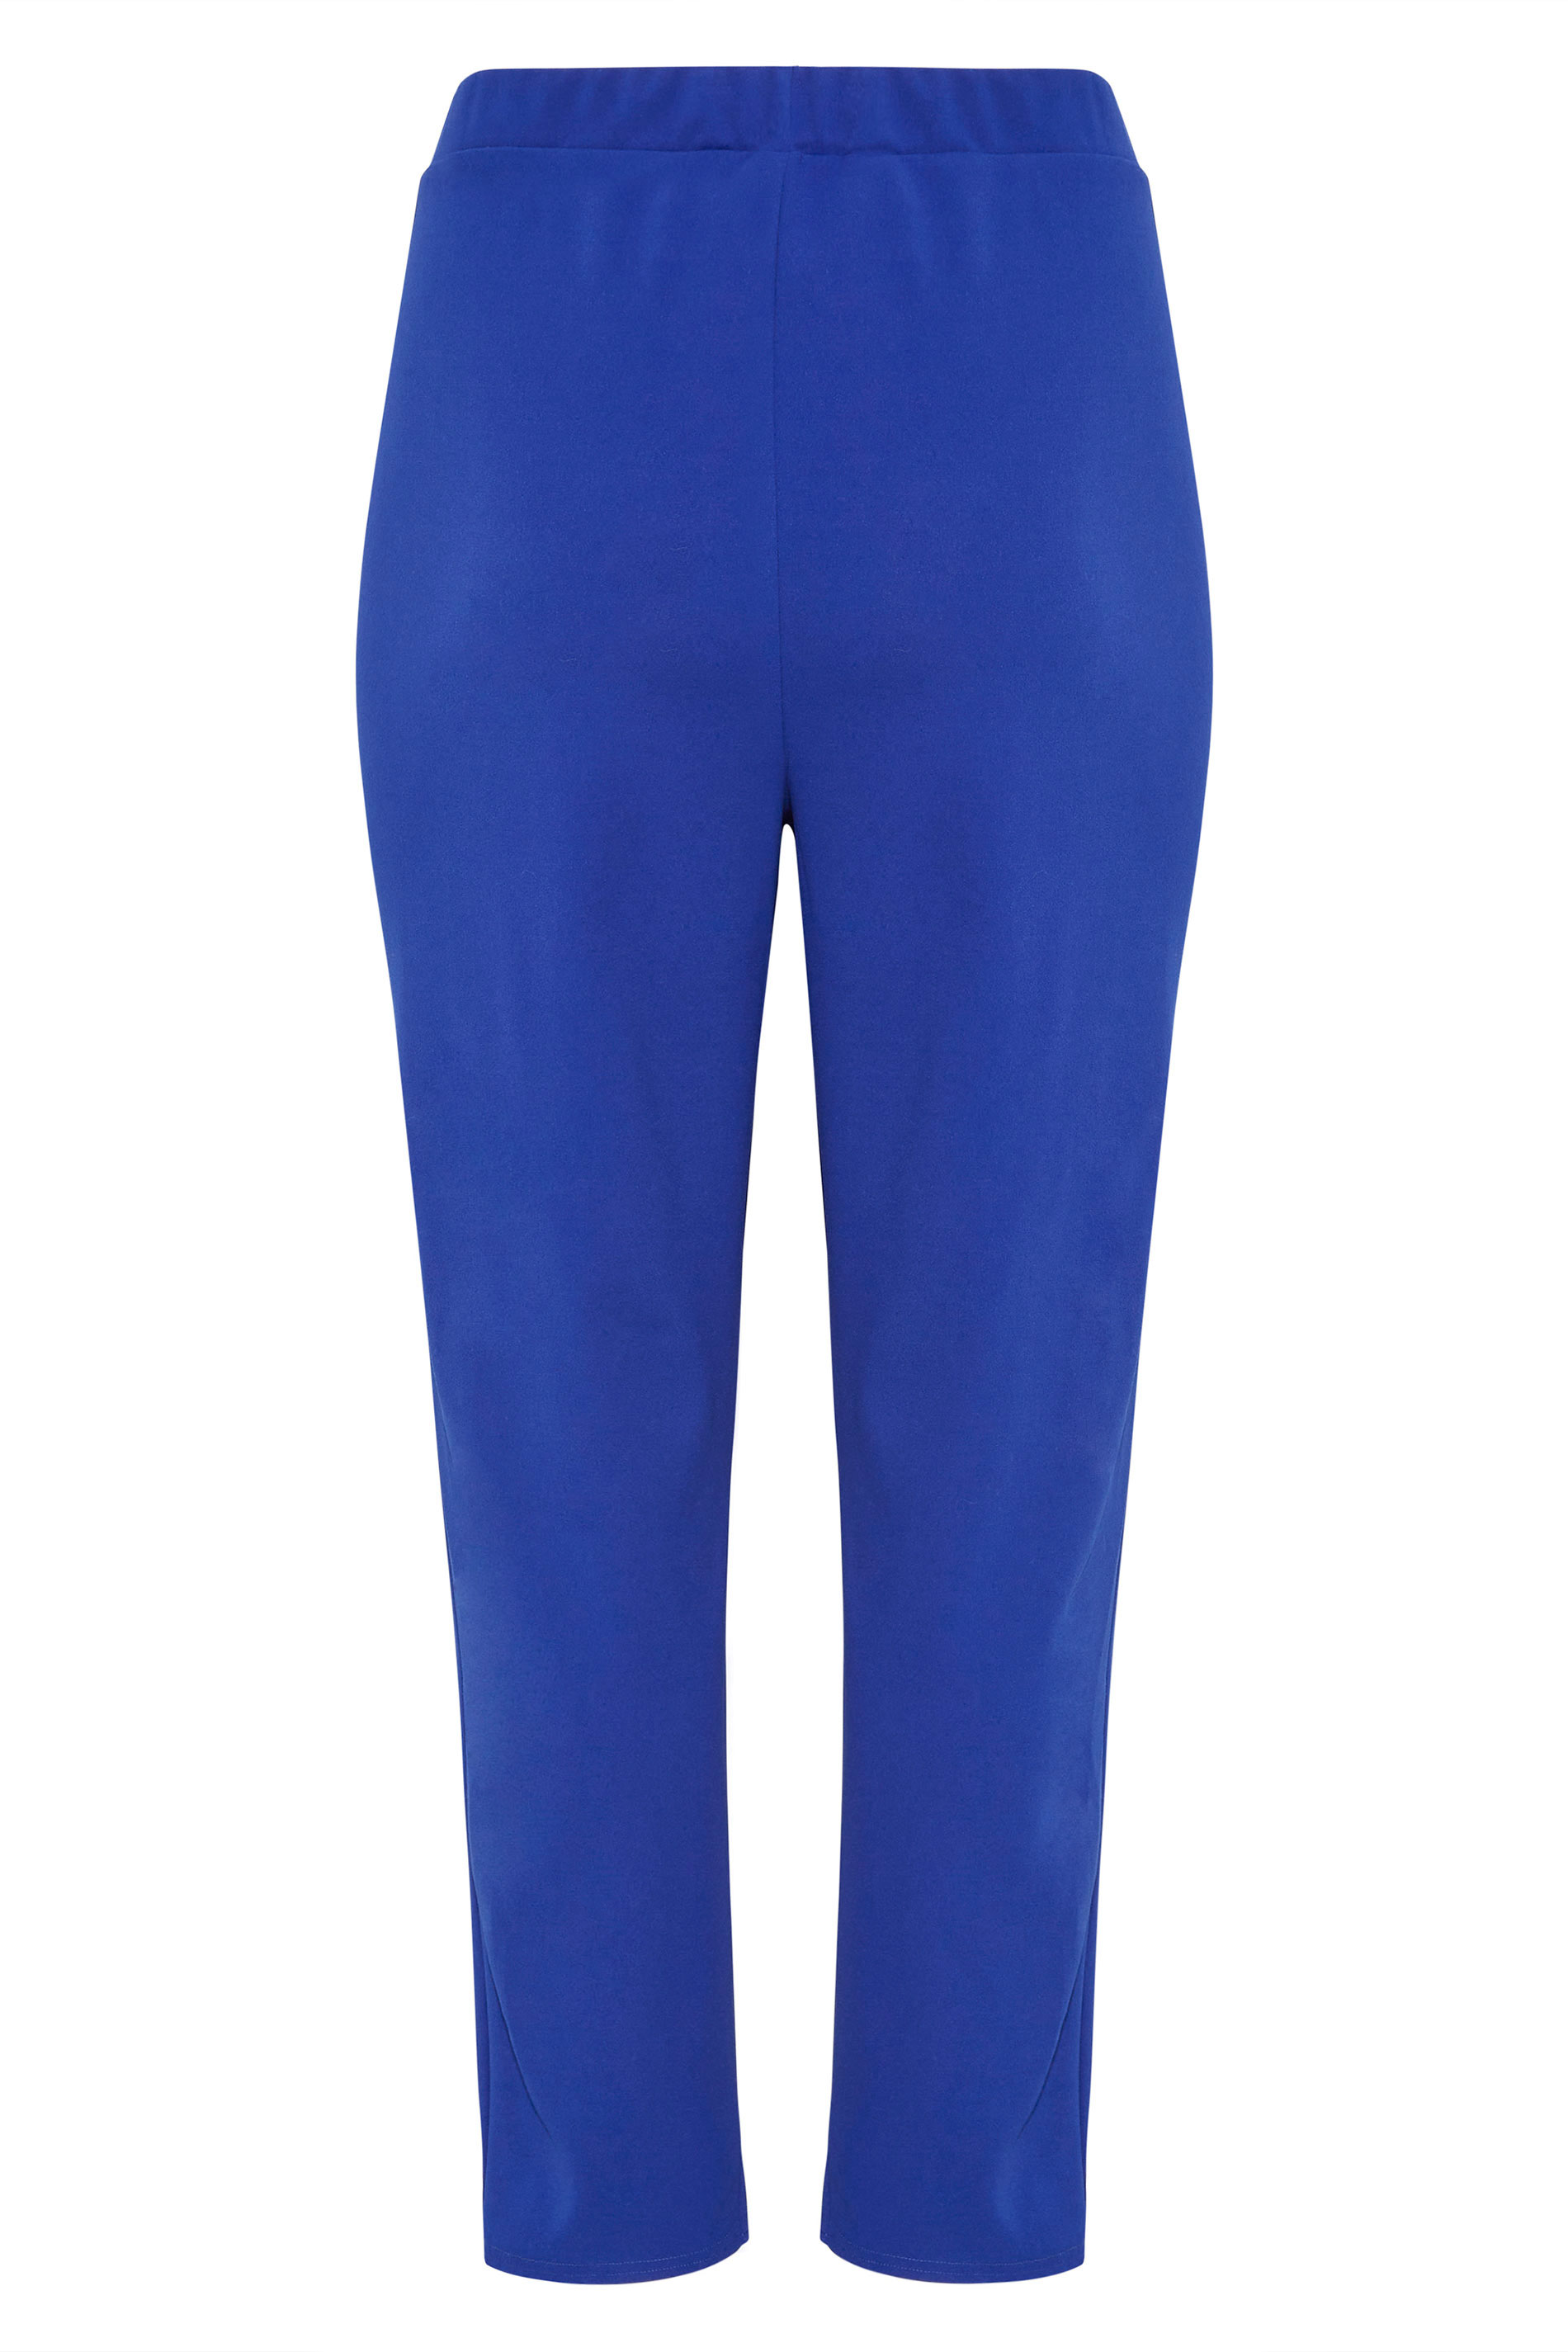 Tapered linenblend trousers  Bright blue  Ladies  HM IN